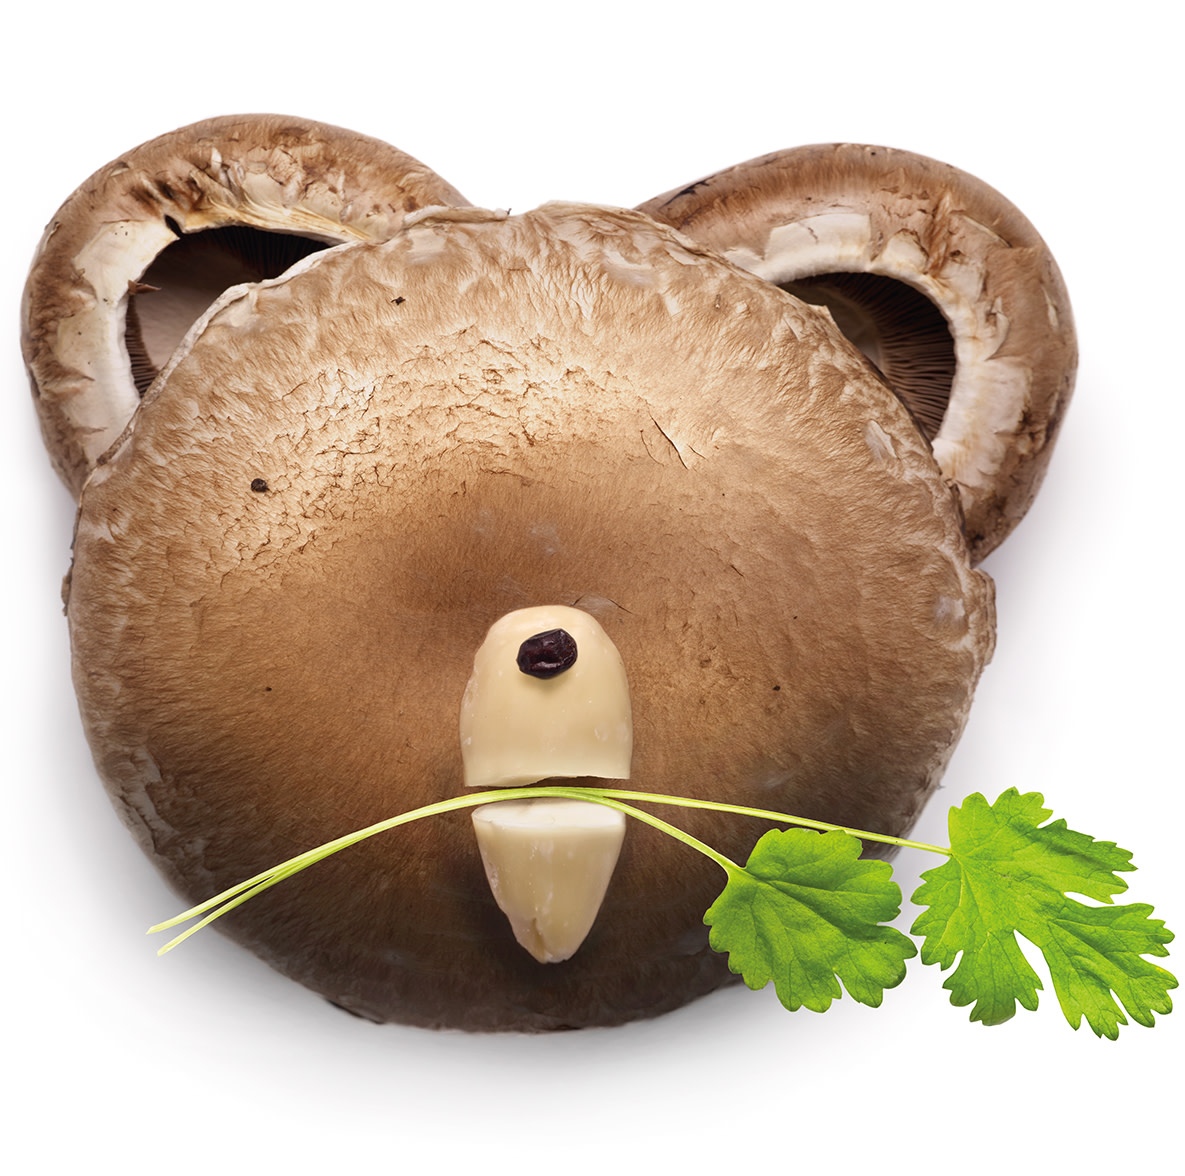 An image of a bear's face made out of mushrooms, with a piece of coriander in his mouth. 